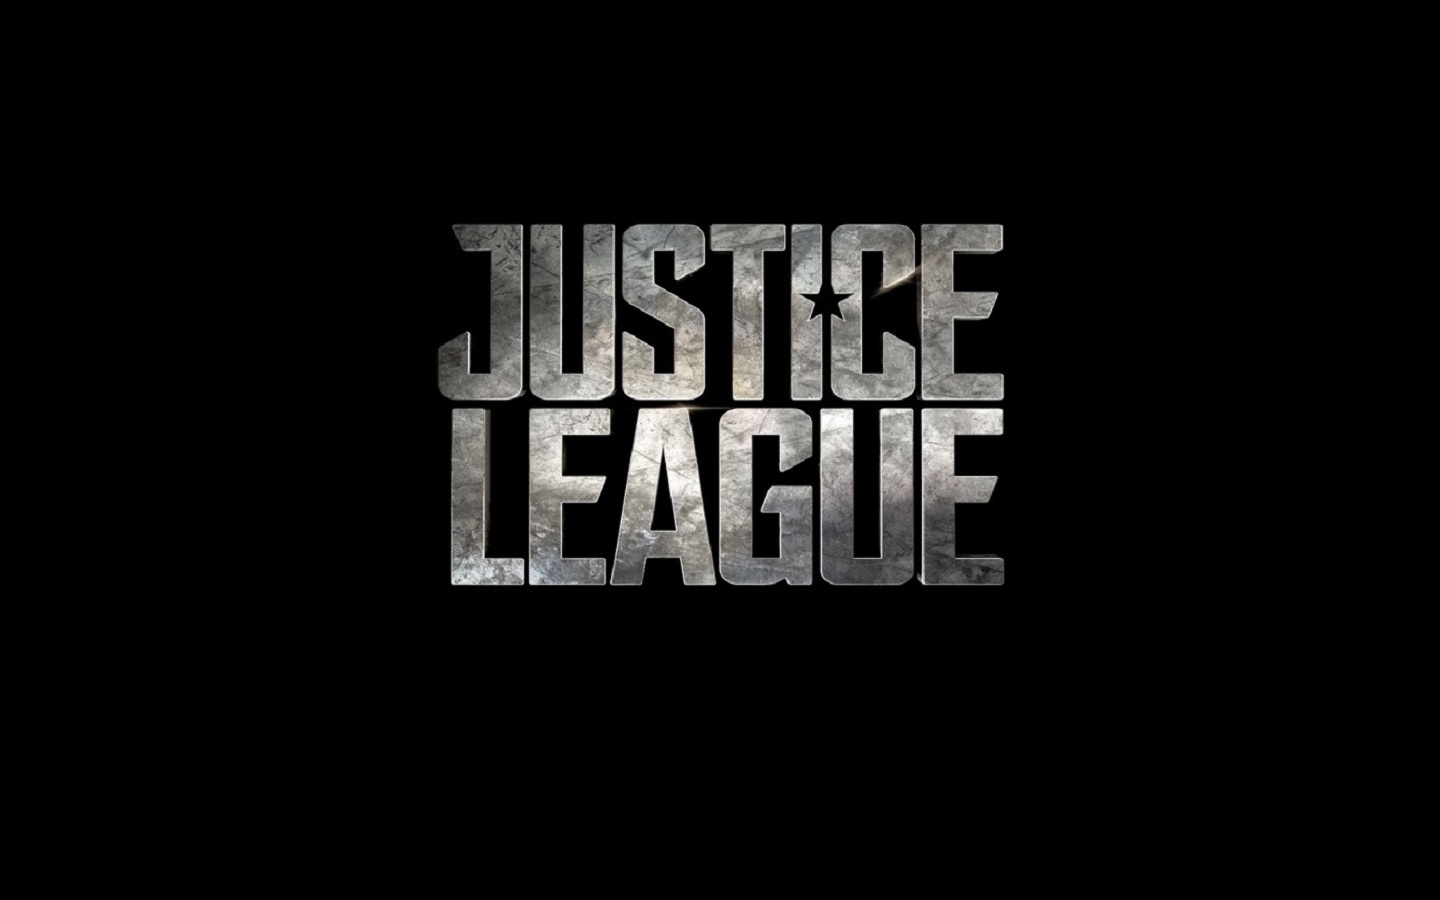 Wonder Woman Justice League 2017 Wallpapers